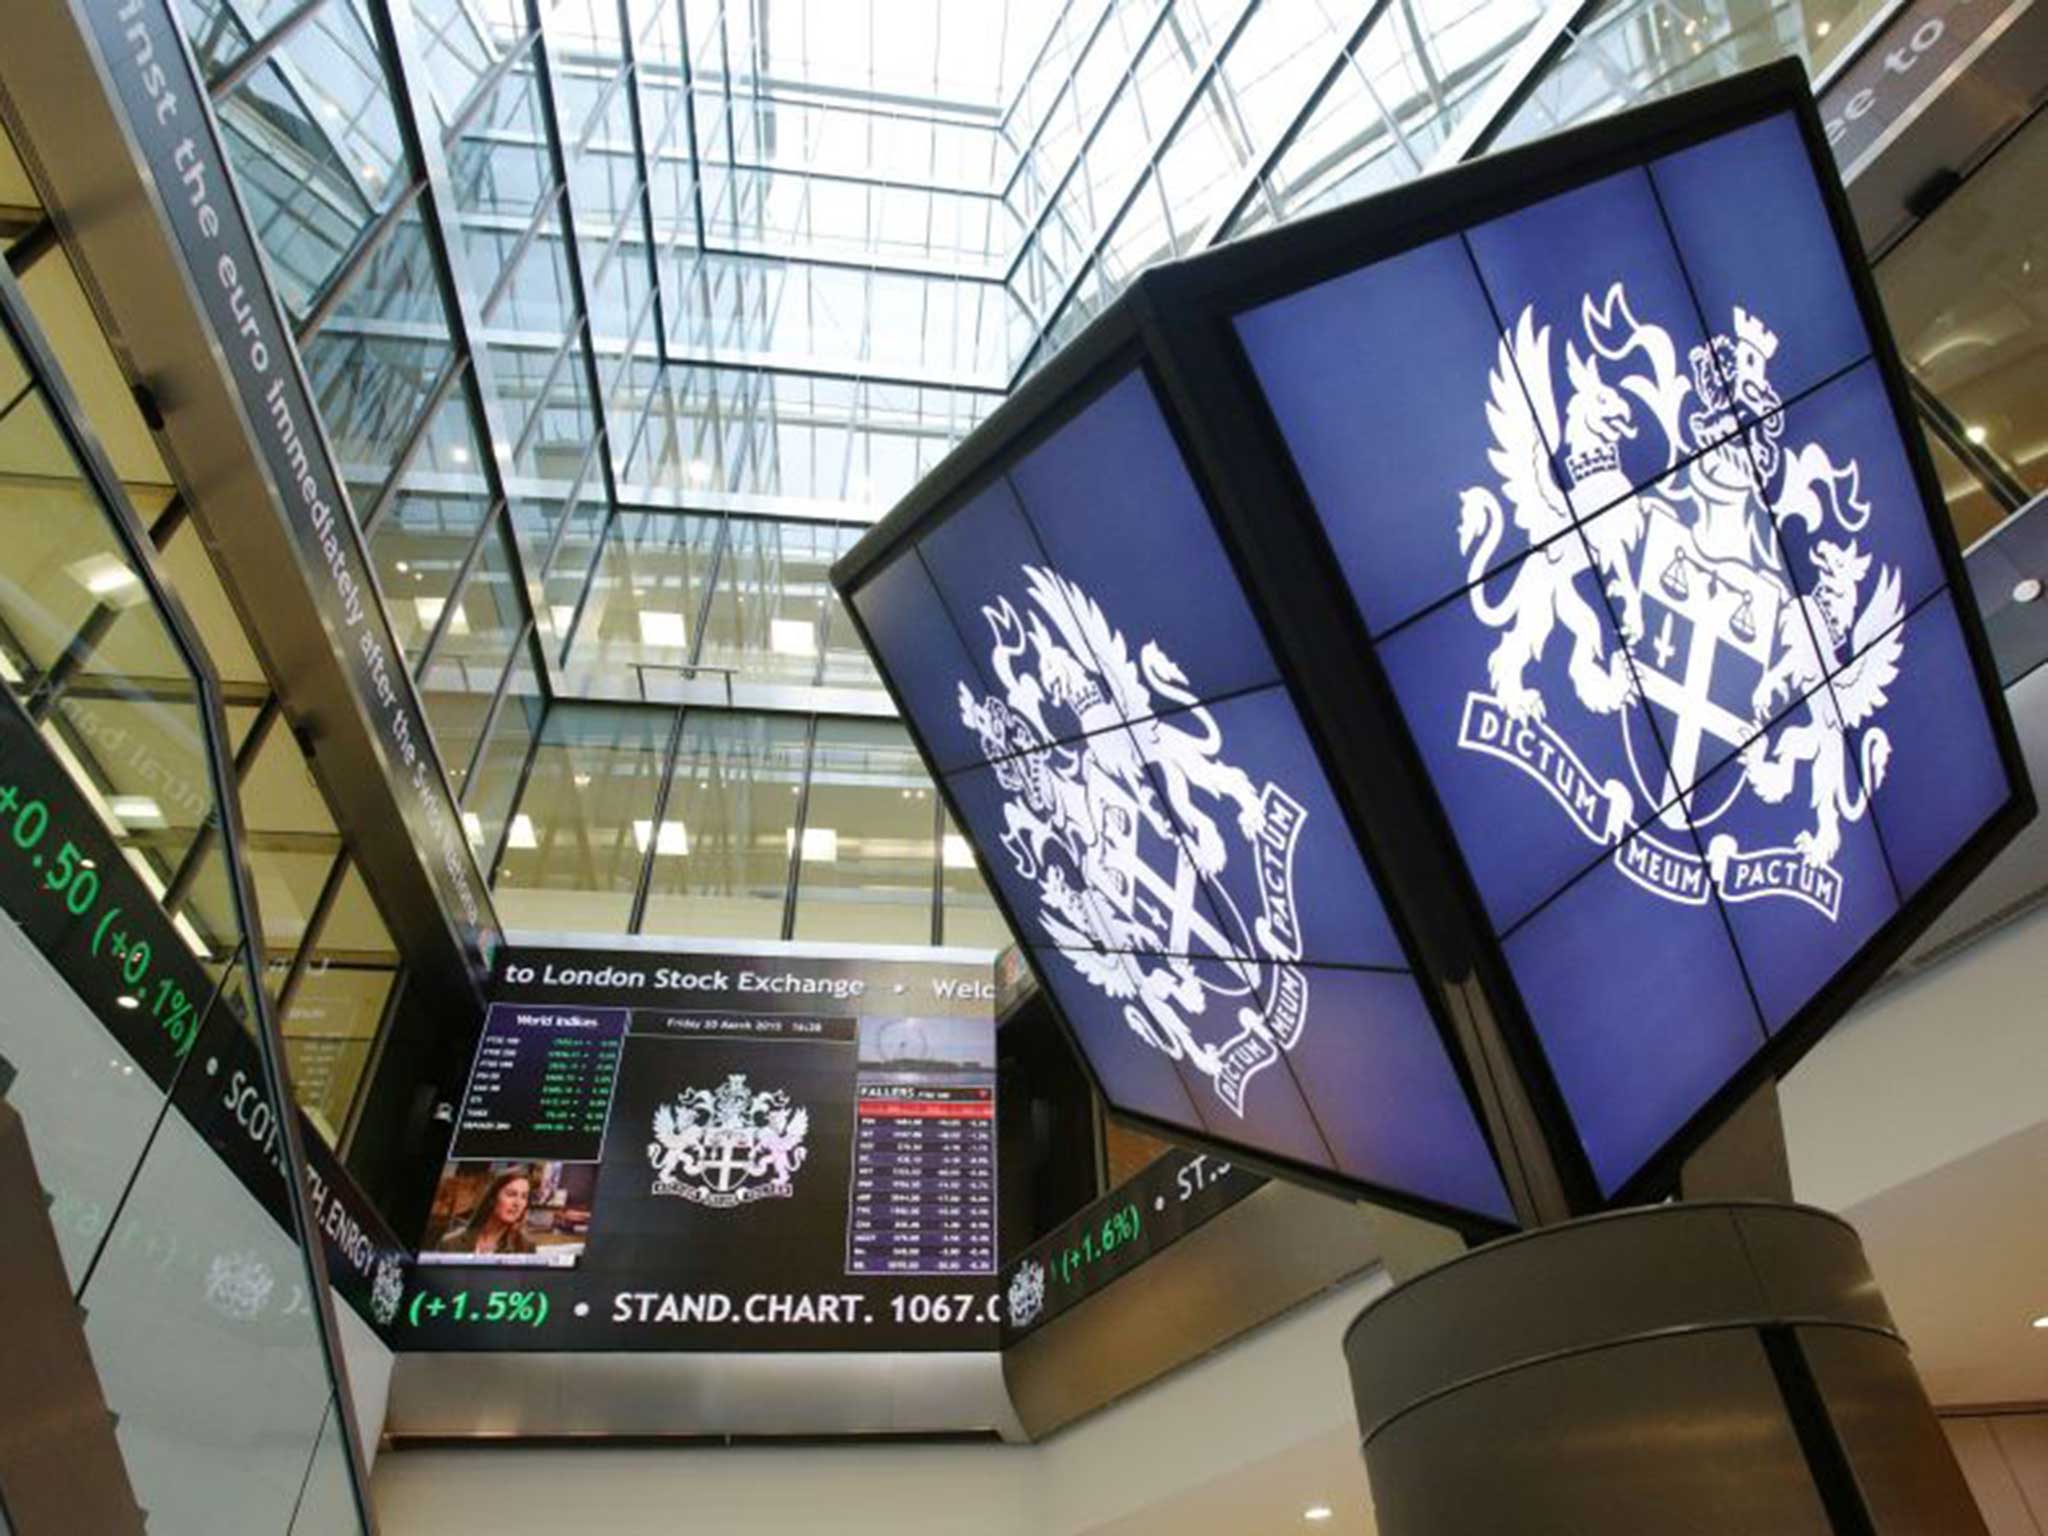 Days after Deutsche Boerse announced plans to merge with London Stock Exchange, Intercontinental Exchange, a US exchange group, is said to be exploring a potential counterbid